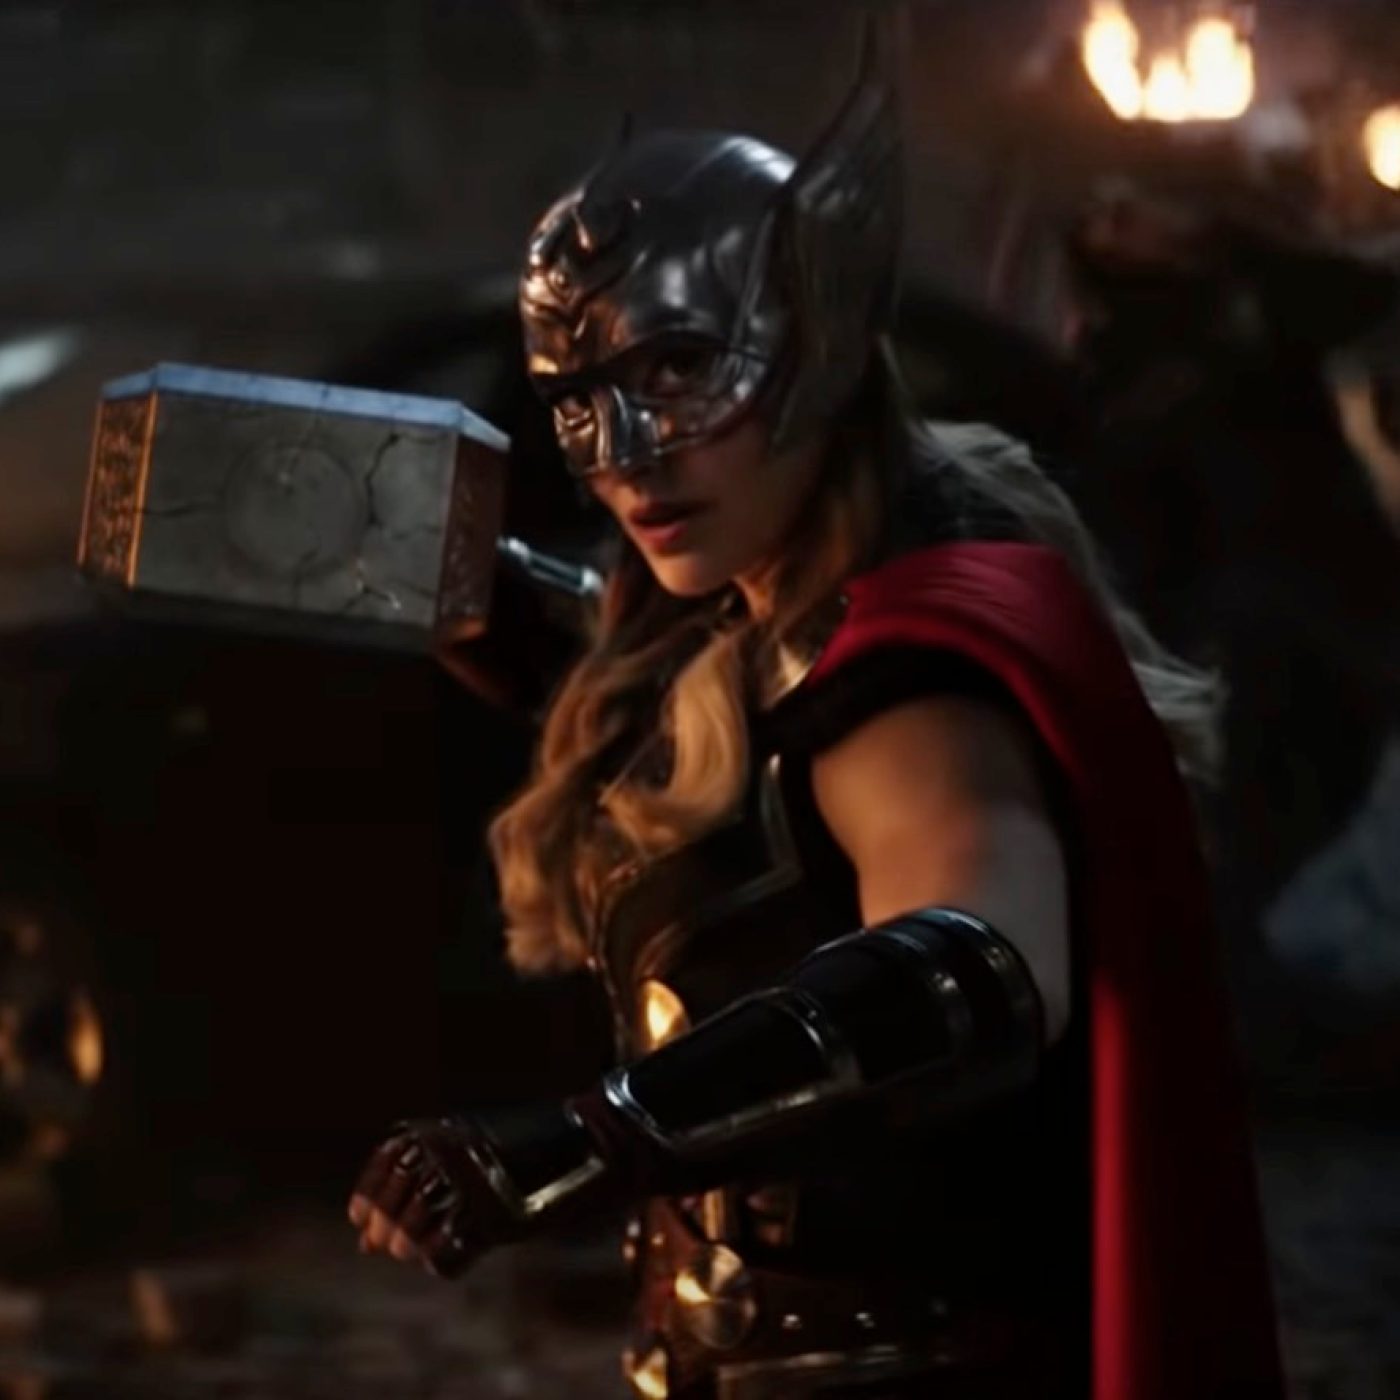 How Record of Ragnarok Turns Thor and Mjolnir Into Villains